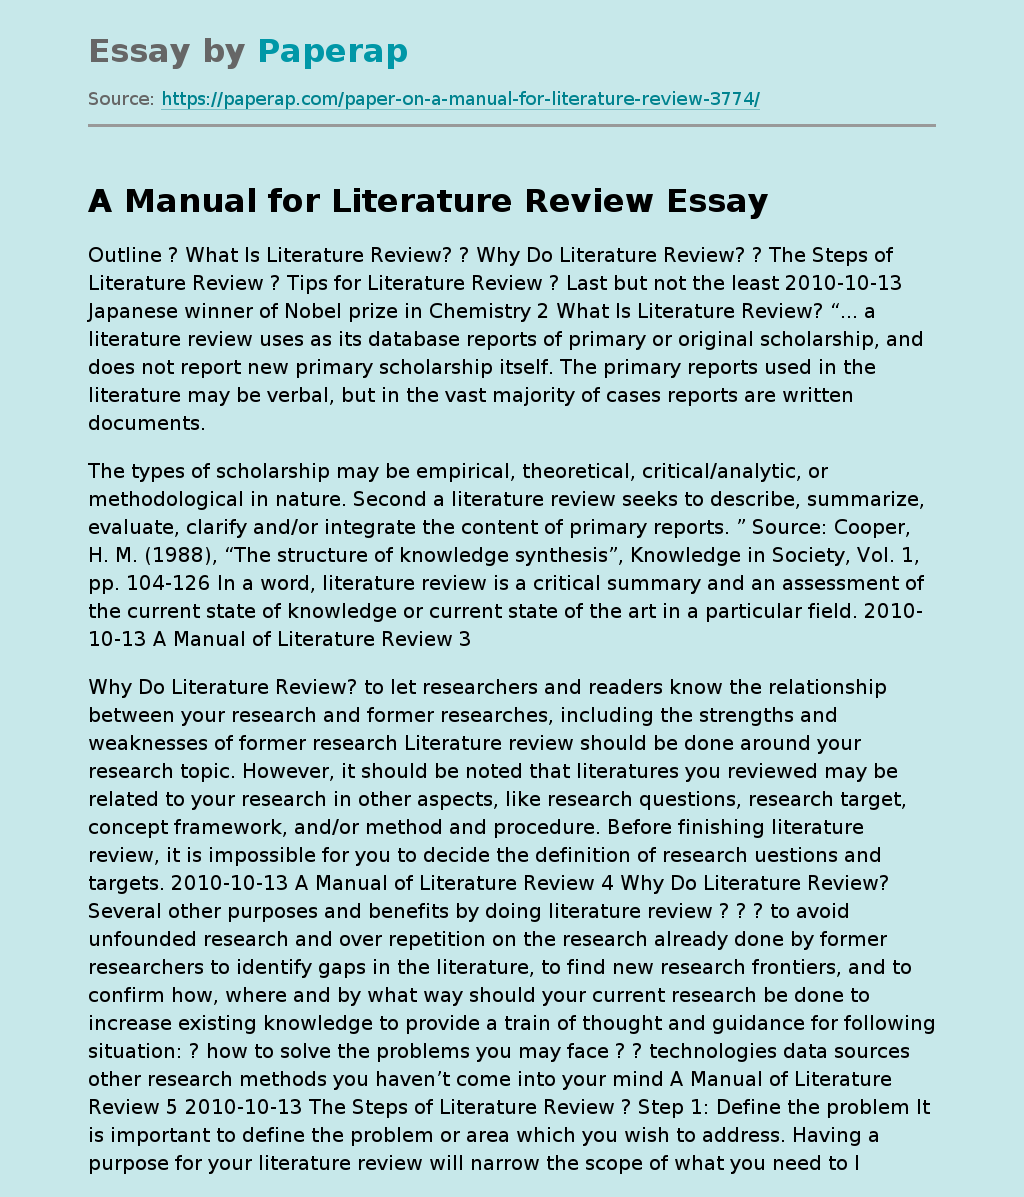 A Manual for Literature Review: The Steps of Literature Review